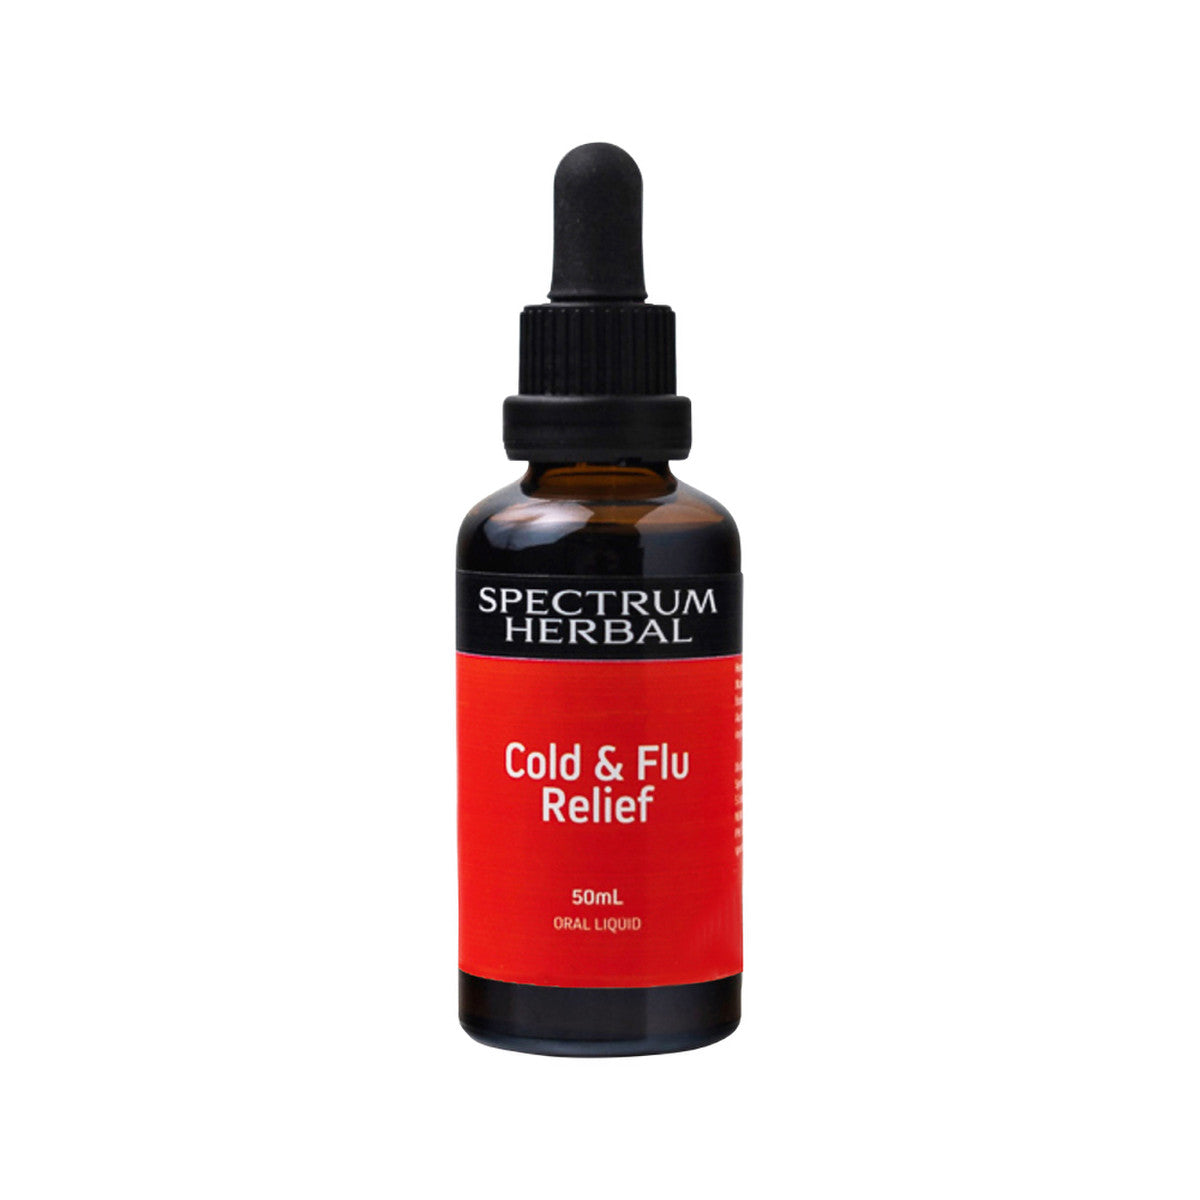 Spectrum Herbal Cold and Flu Relief 50ml